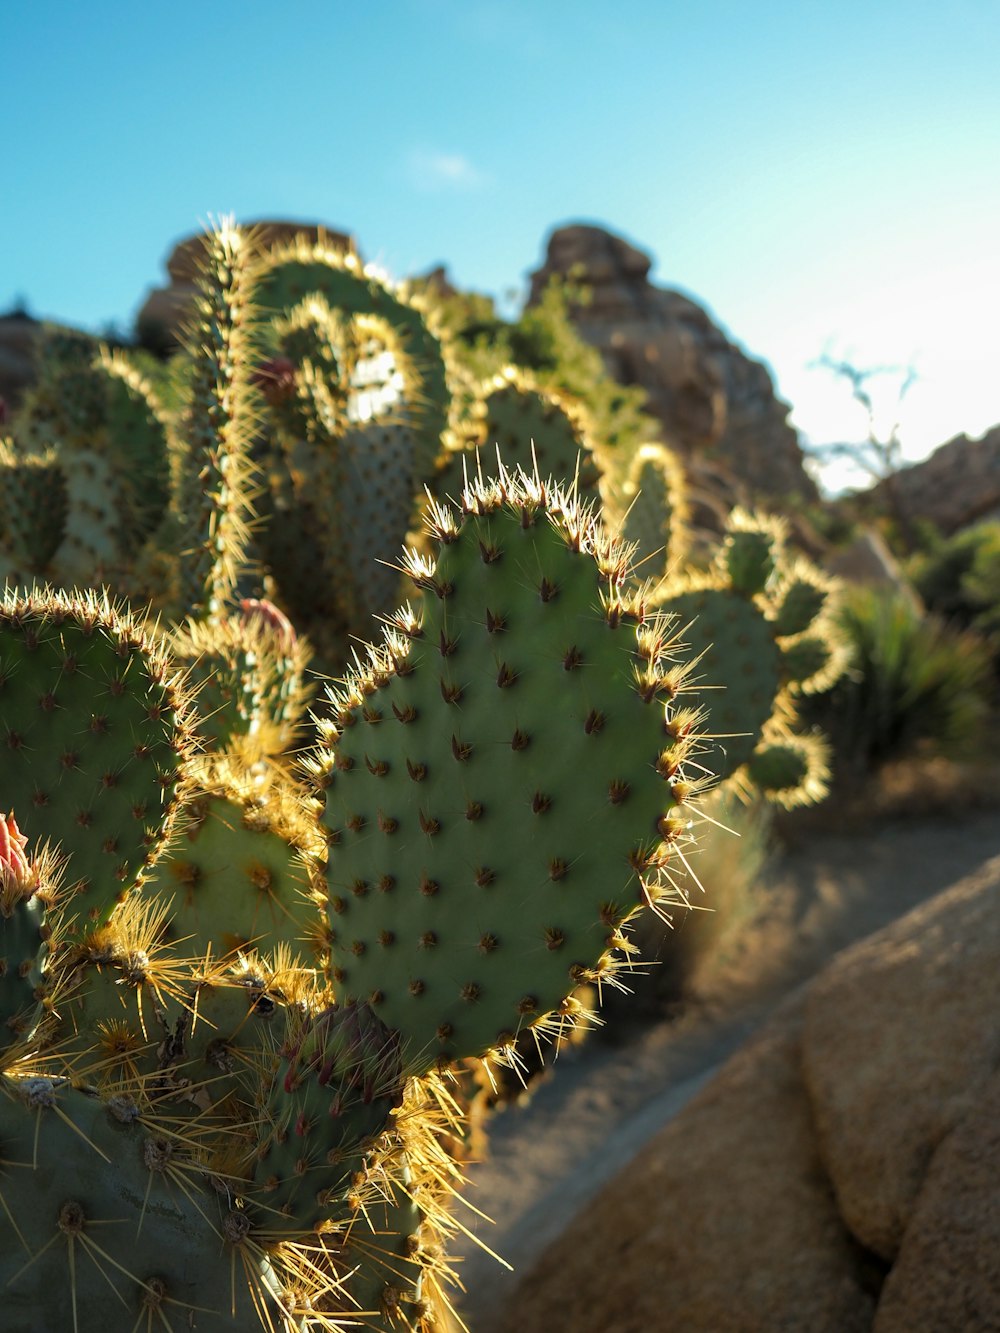 a cactus in the desert with rocks in the background